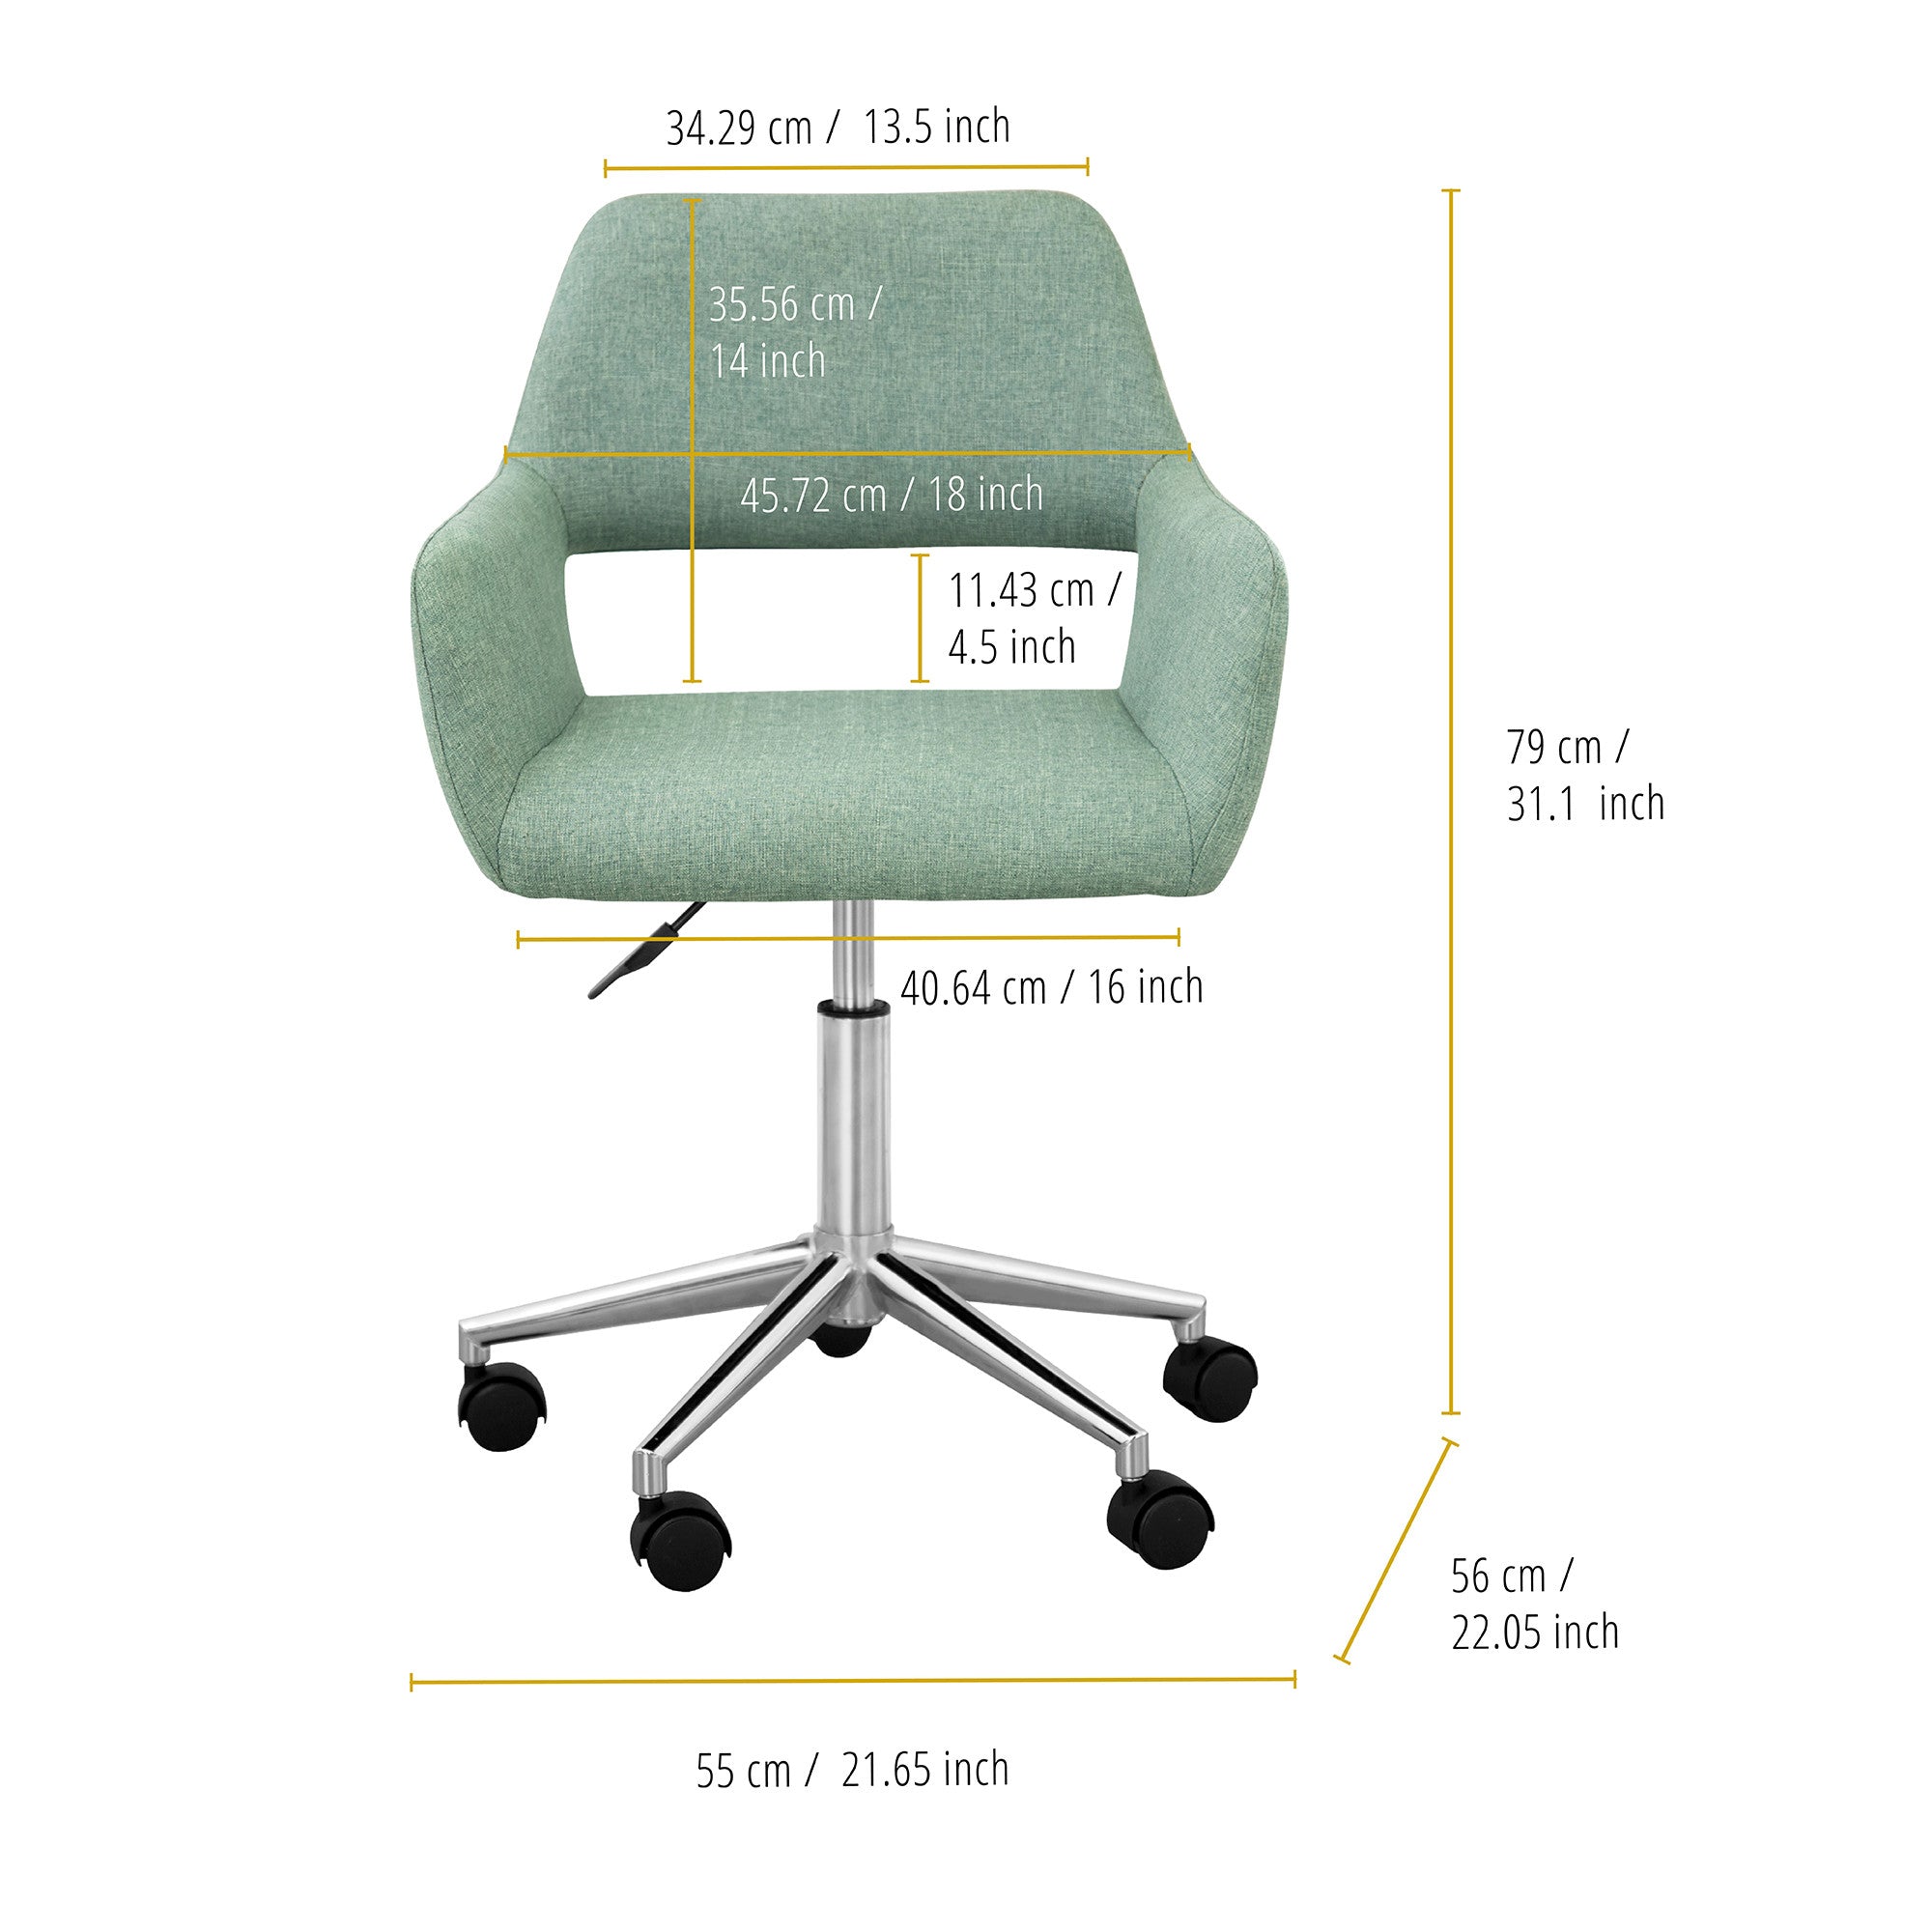 Teamson Home Modern Fabric Office Chair with Adjustable Ergonomic Seat, Swivel Base, and Wheels, Mint/Chrome